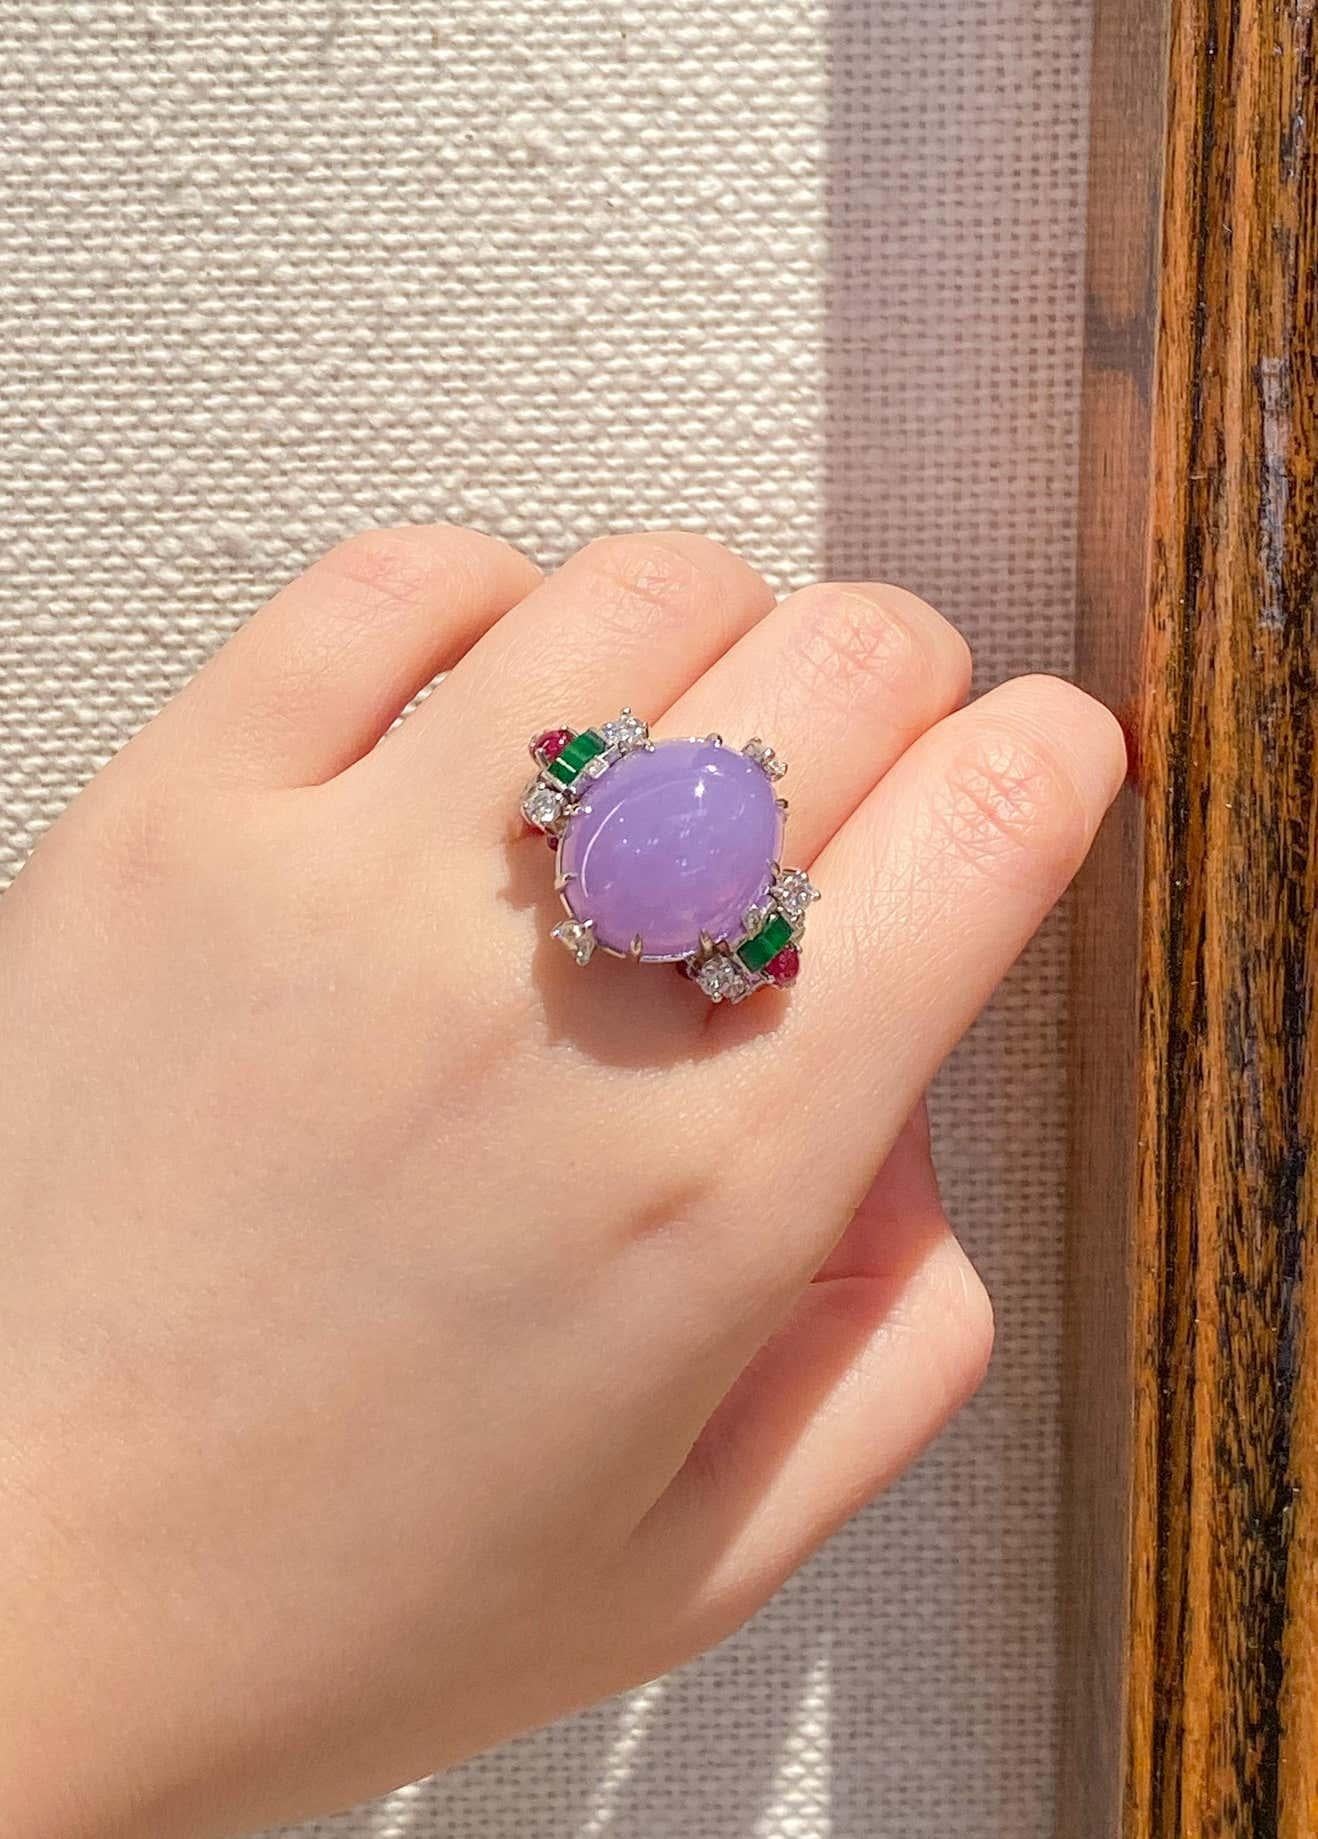 Featuring a charming lavender hue, this bold ring designed by Dilys' is a rare piece also designed to be transformable, allowing the wearer to wear it as both a statement solitaire ring and a standout cocktail ring. The philosophy at Dilys' is that